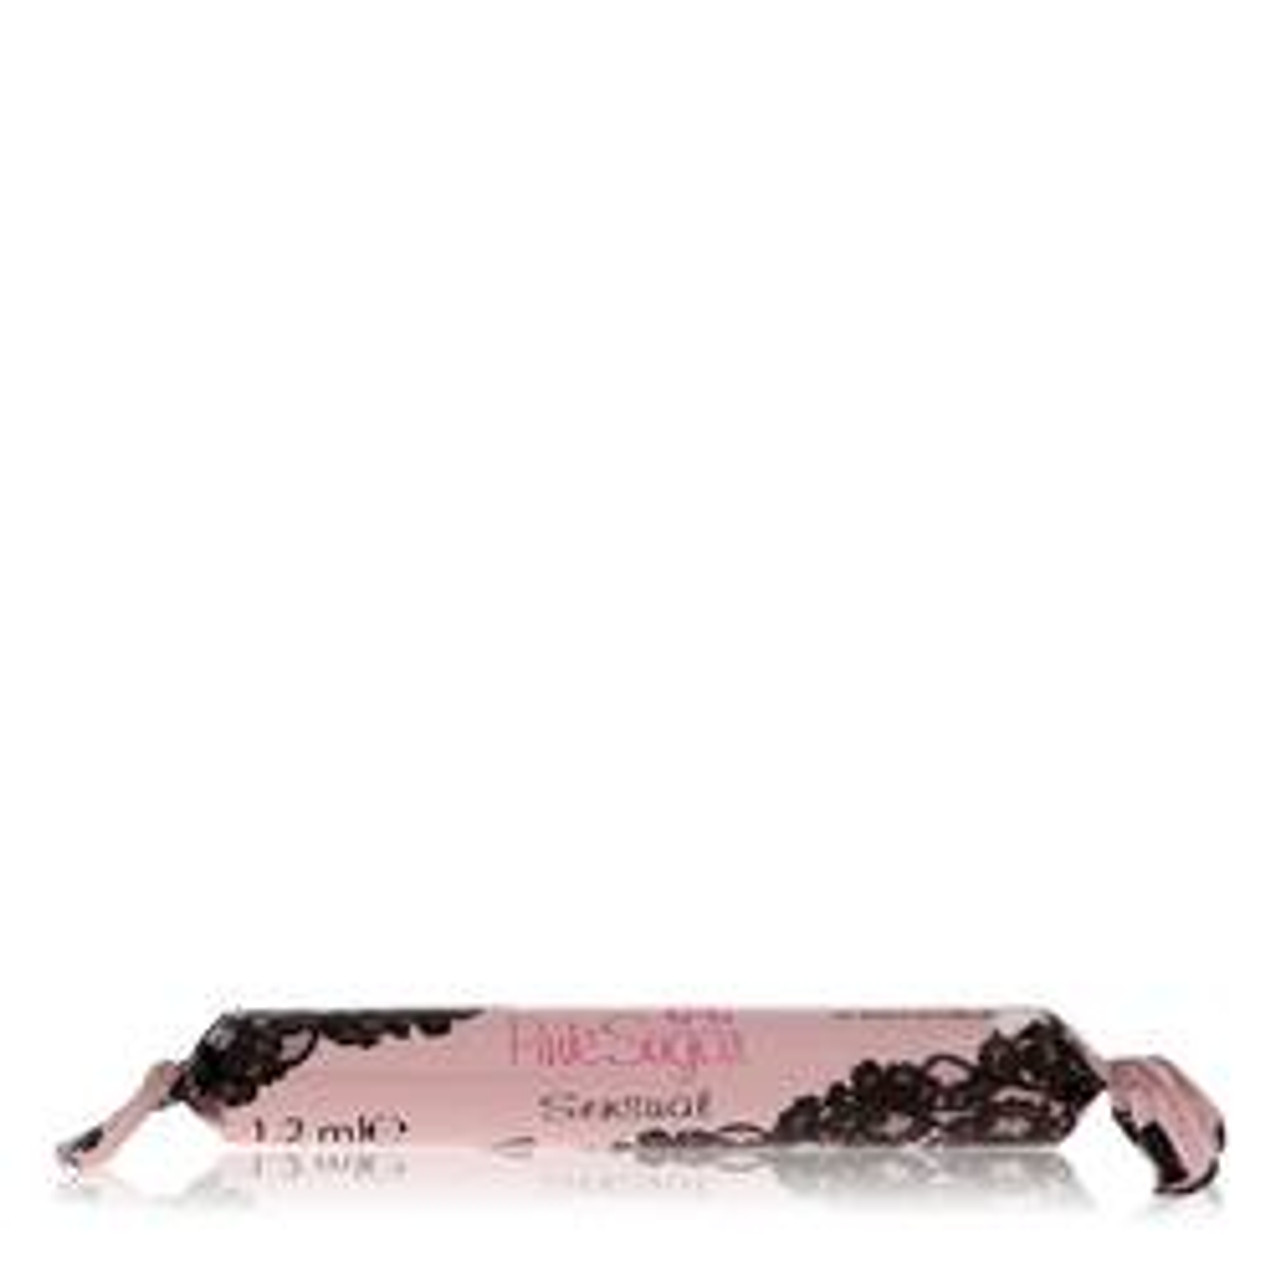 Pink Sugar Sensual Perfume By Aquolina Vial (sample) 0.04 oz for Women - [From 7.00 - Choose pk Qty ] - *Ships from Miami